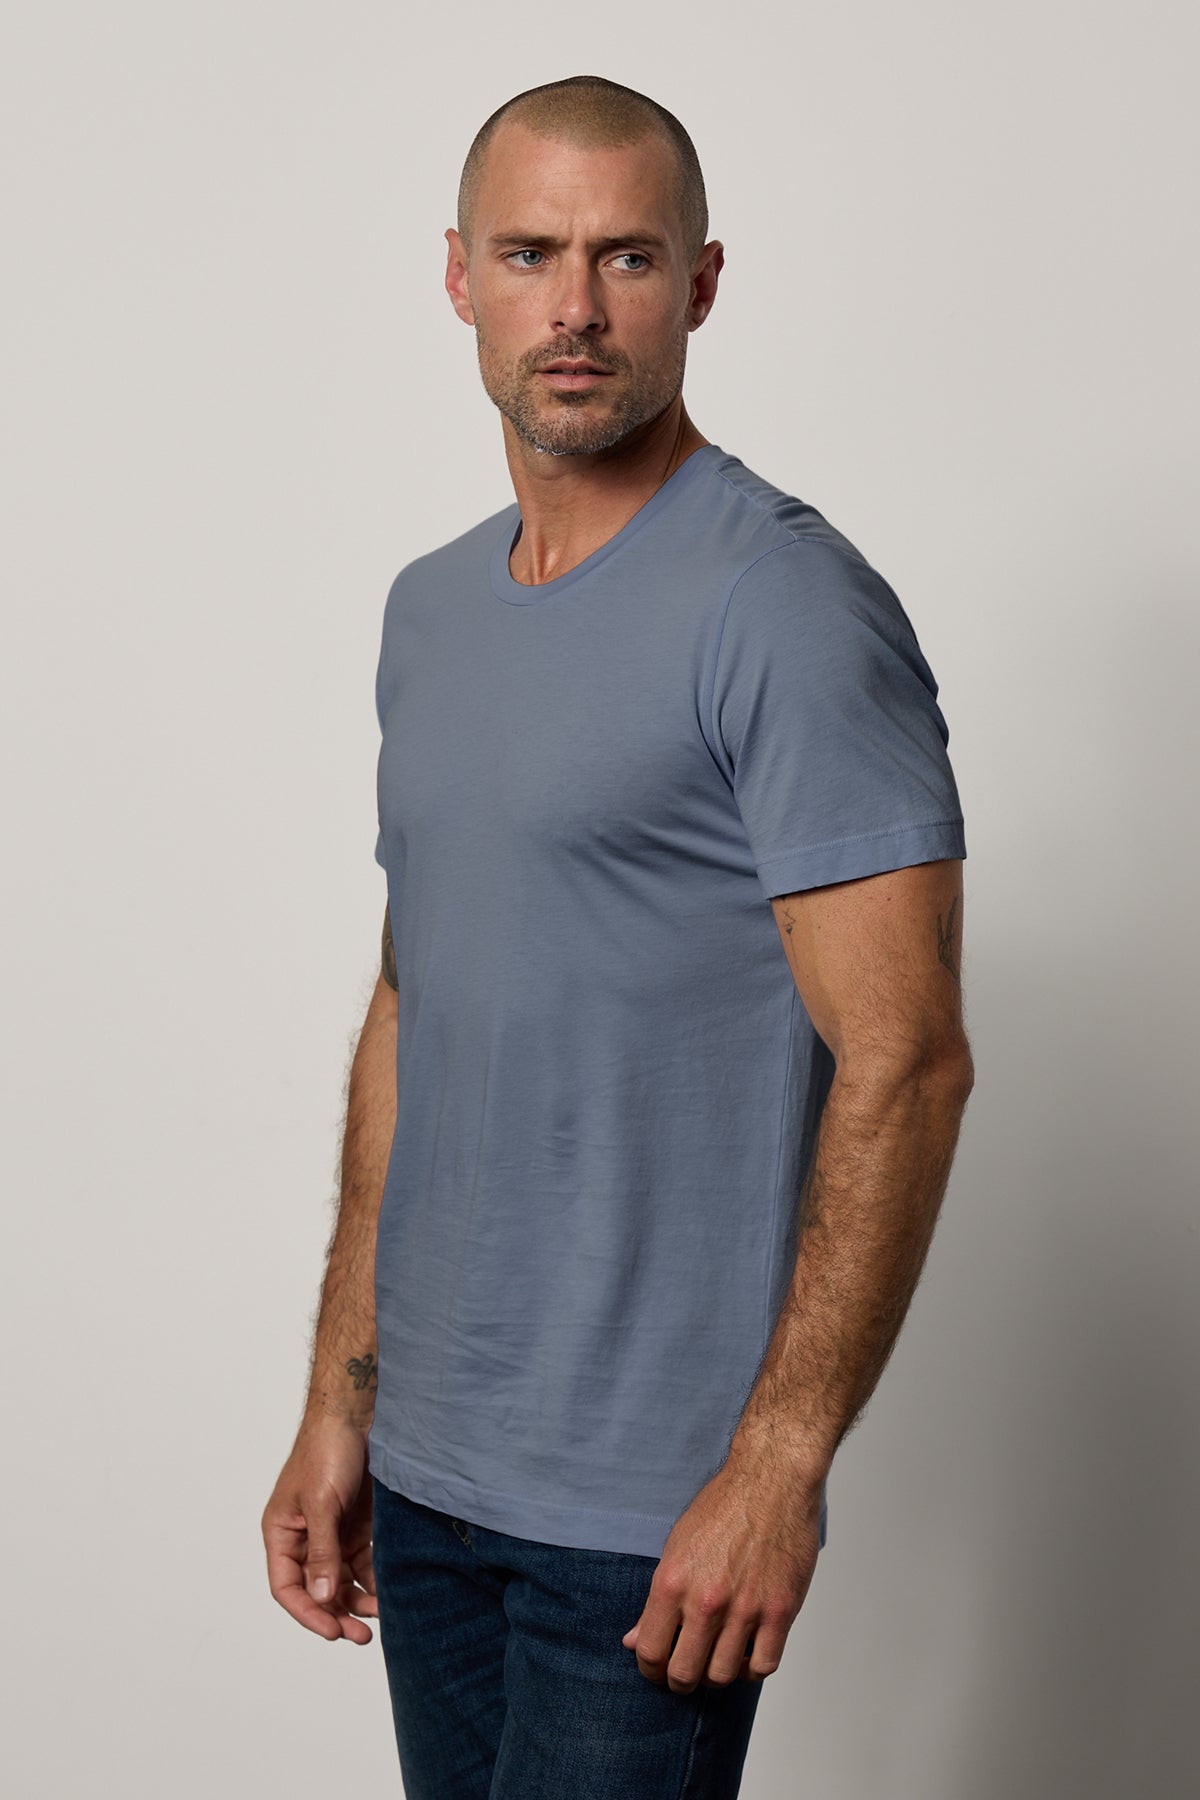 The man, dressed in a Velvet by Graham & Spencer HOWARD WHISPER CLASSIC CREW NECK TEE and jeans, exuded effortless style and comfort with his lightweight cotton knit attire.-25793661239489